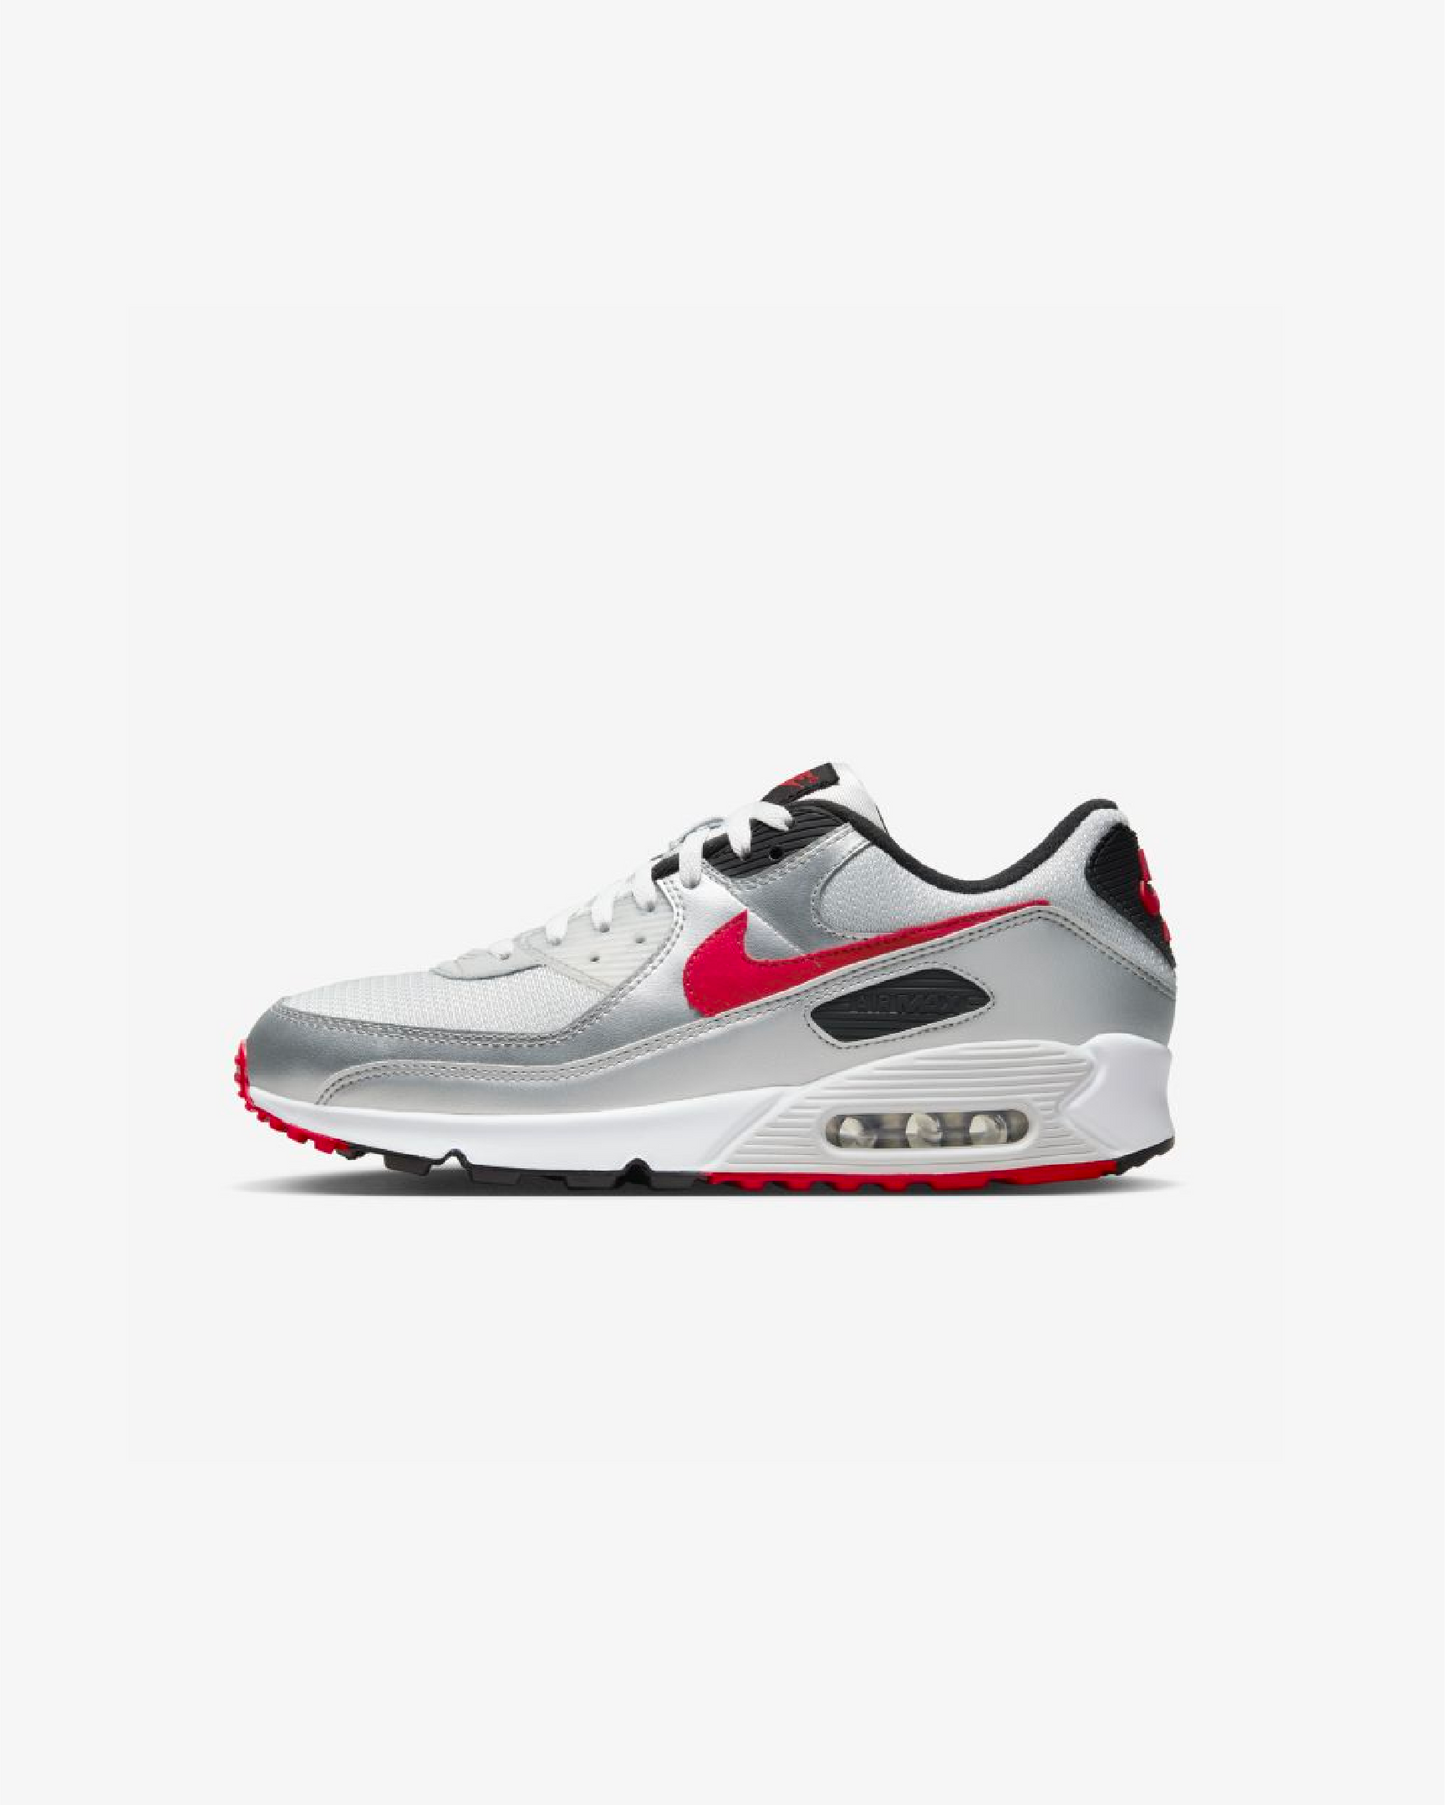 NIKE AIR MAX 90 - PHOTON DUST UNIVERSITY RED